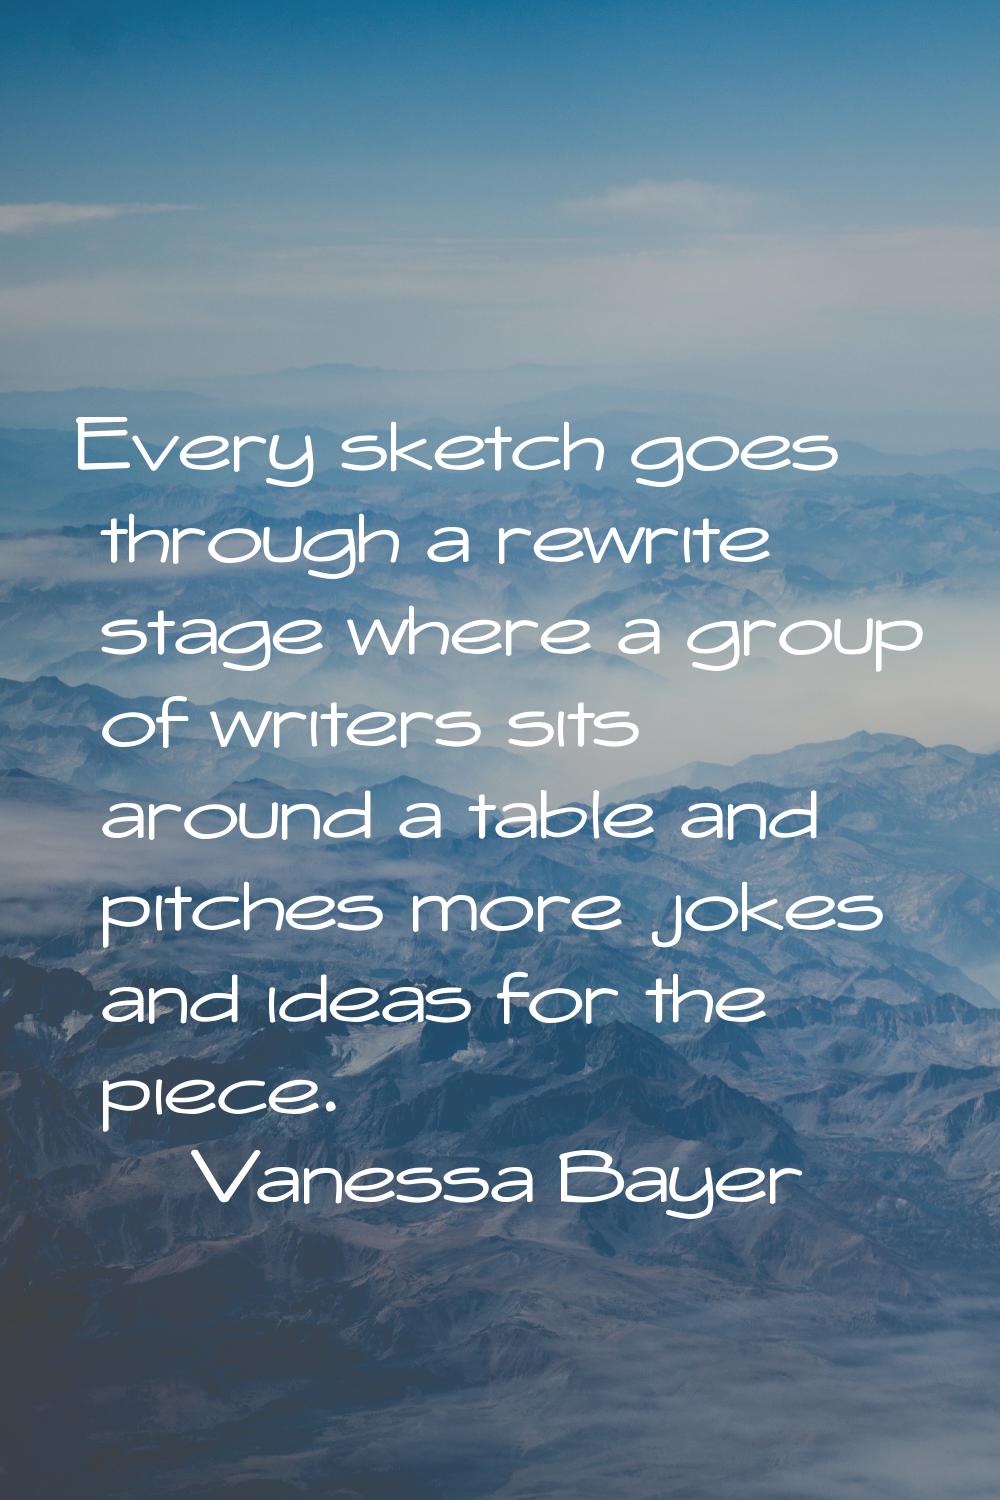 Every sketch goes through a rewrite stage where a group of writers sits around a table and pitches 